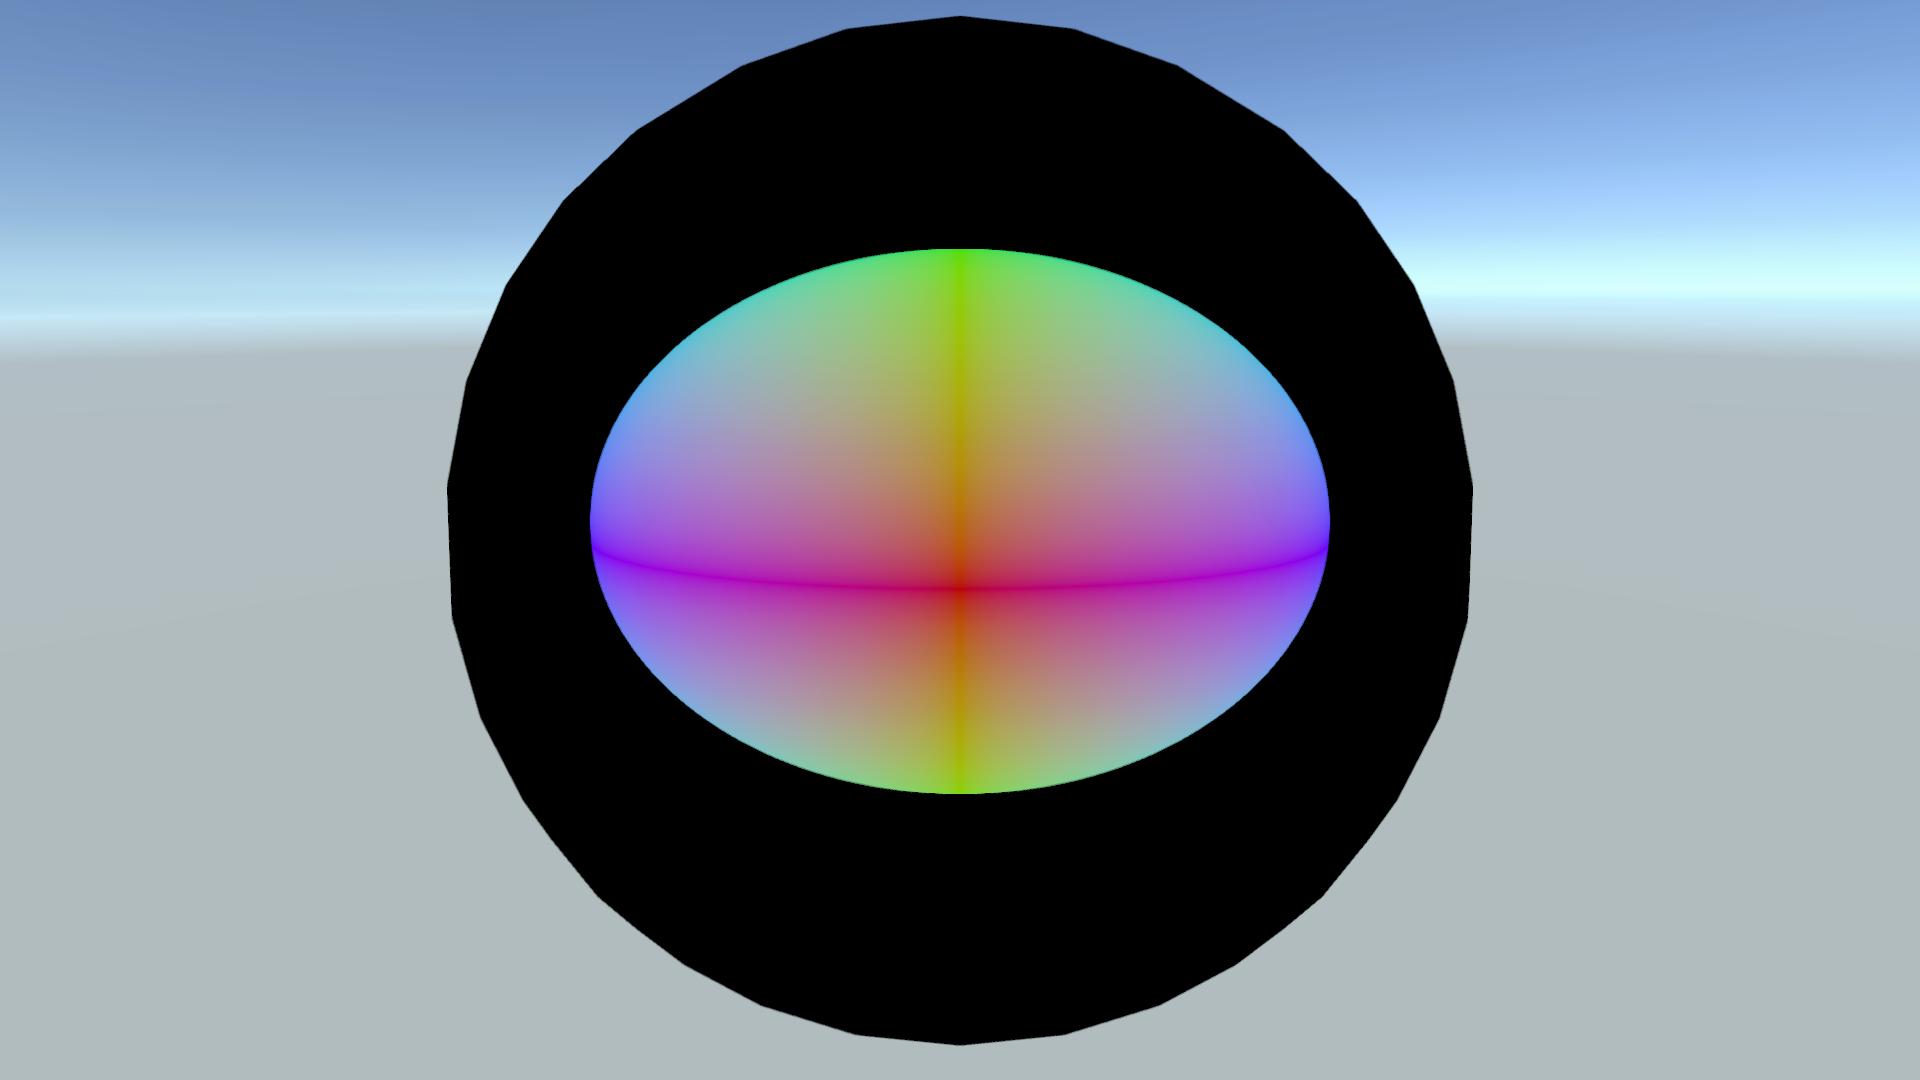 Ellipsoid on a 50 scale sphere object with parameters \(s_x = 10\), \(s_y = 15\), \(s_z = 20\) and distance scale = 20